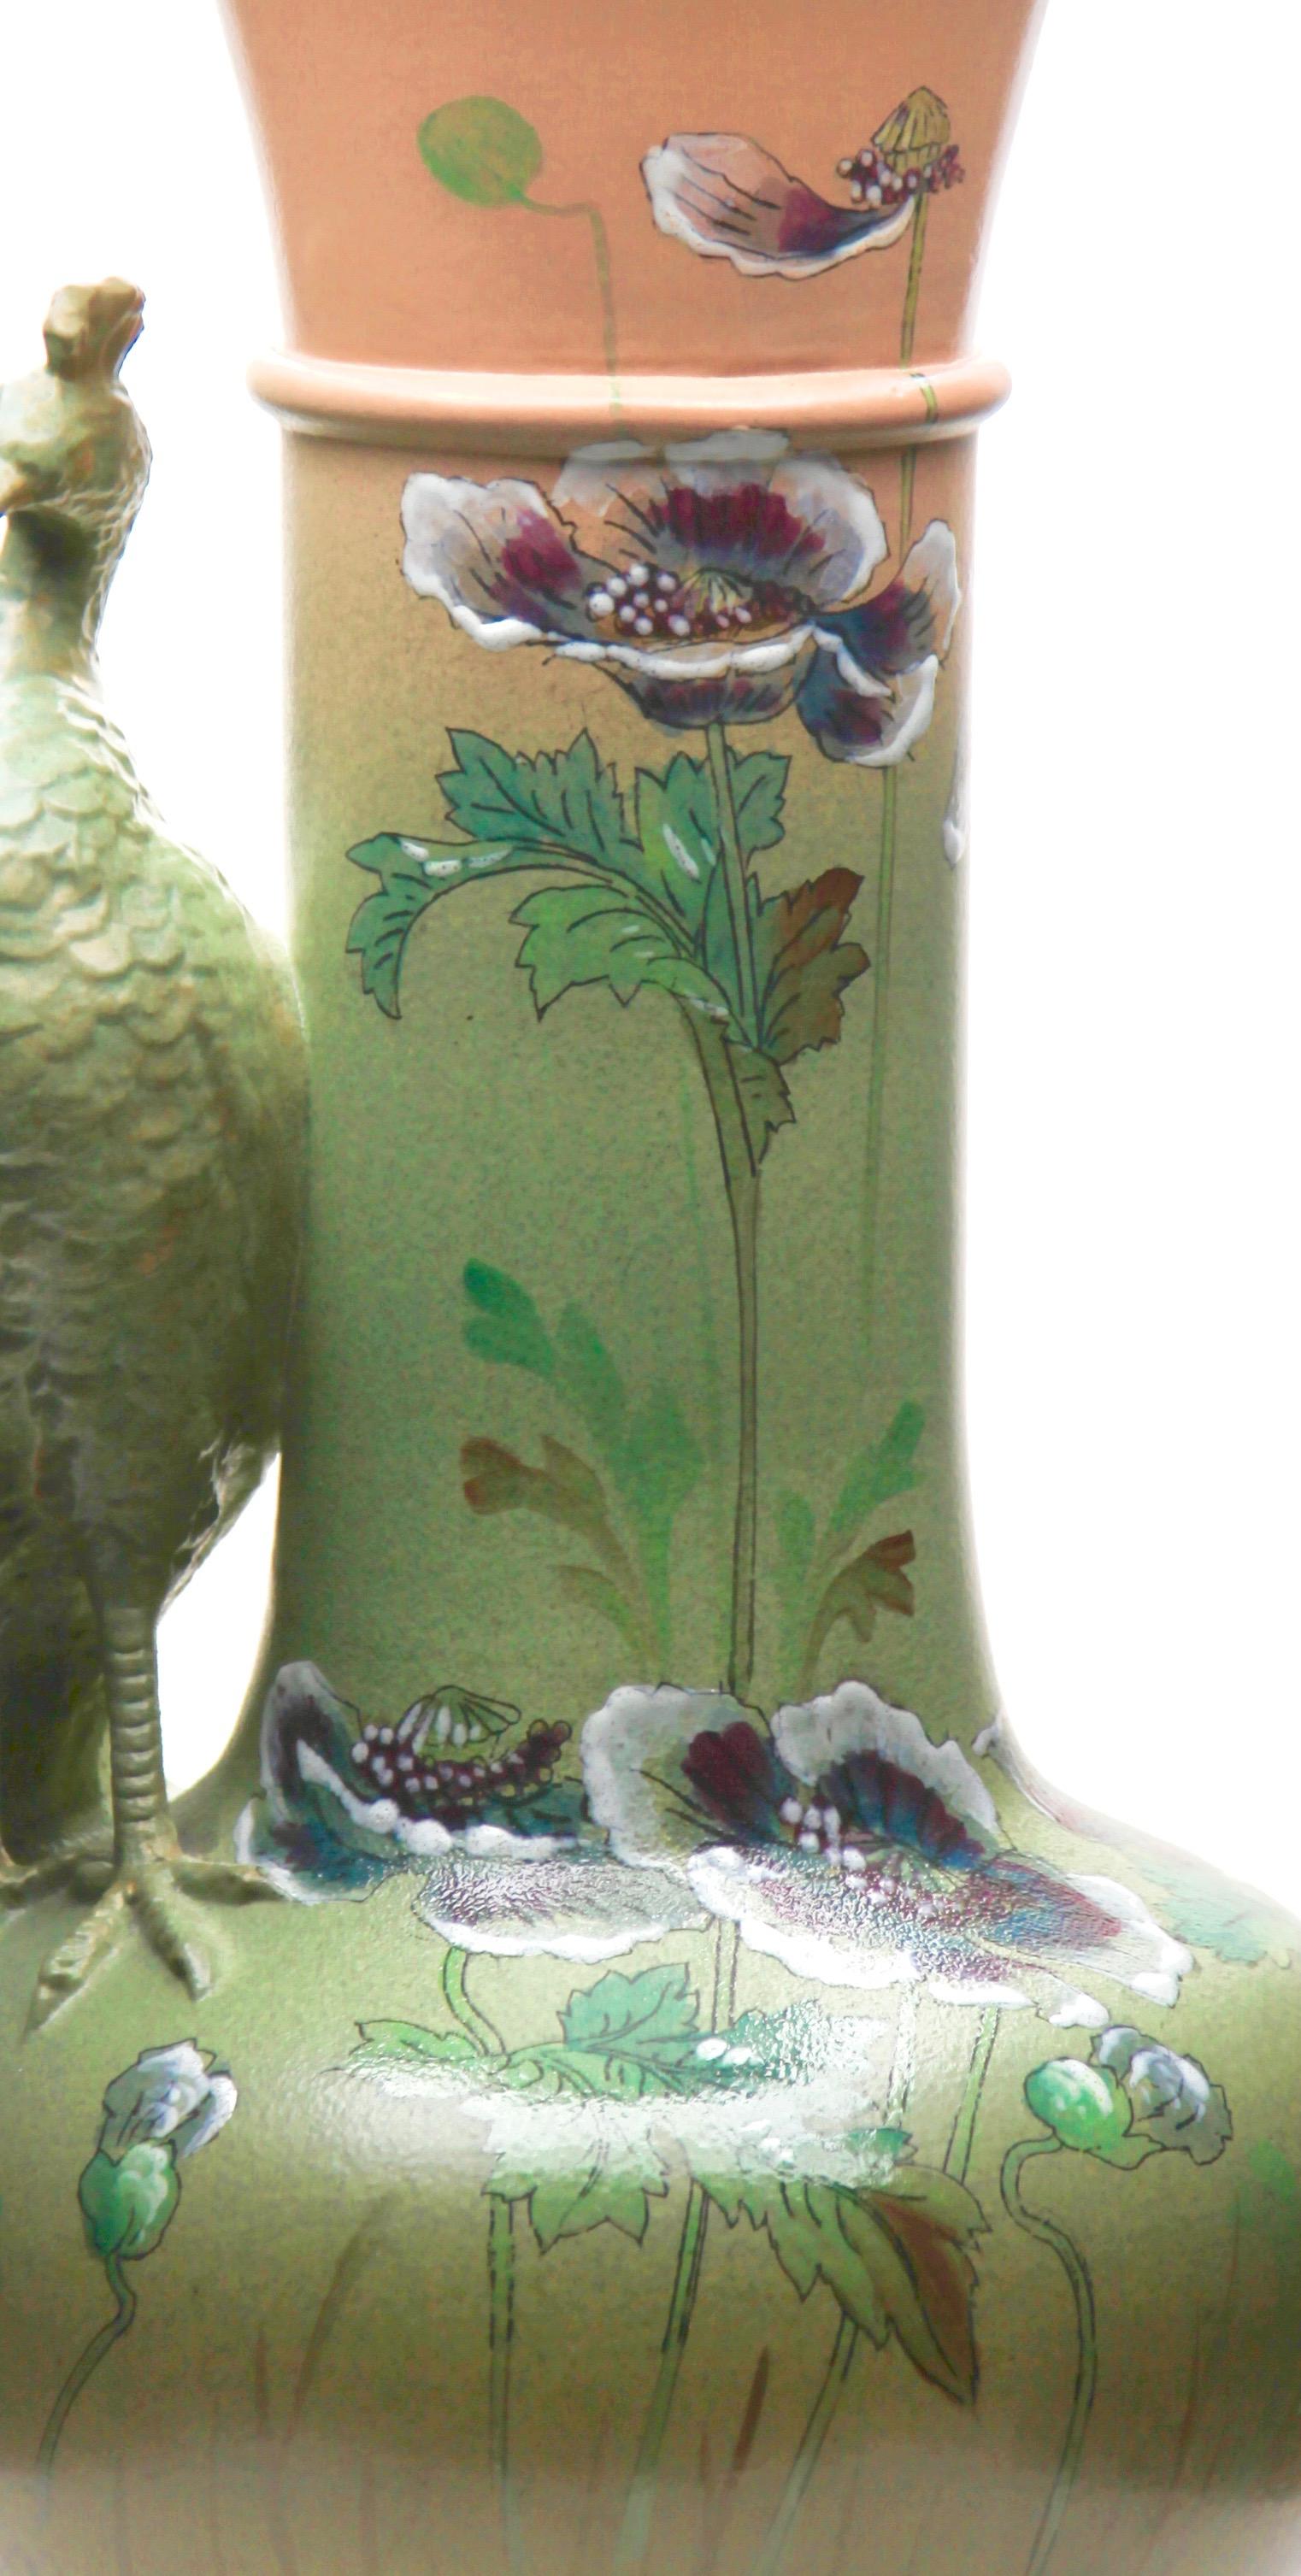 Mid-20th Century Large Art Nouveau Vase with a Sculpted Peacock and 'Opium' Poppies